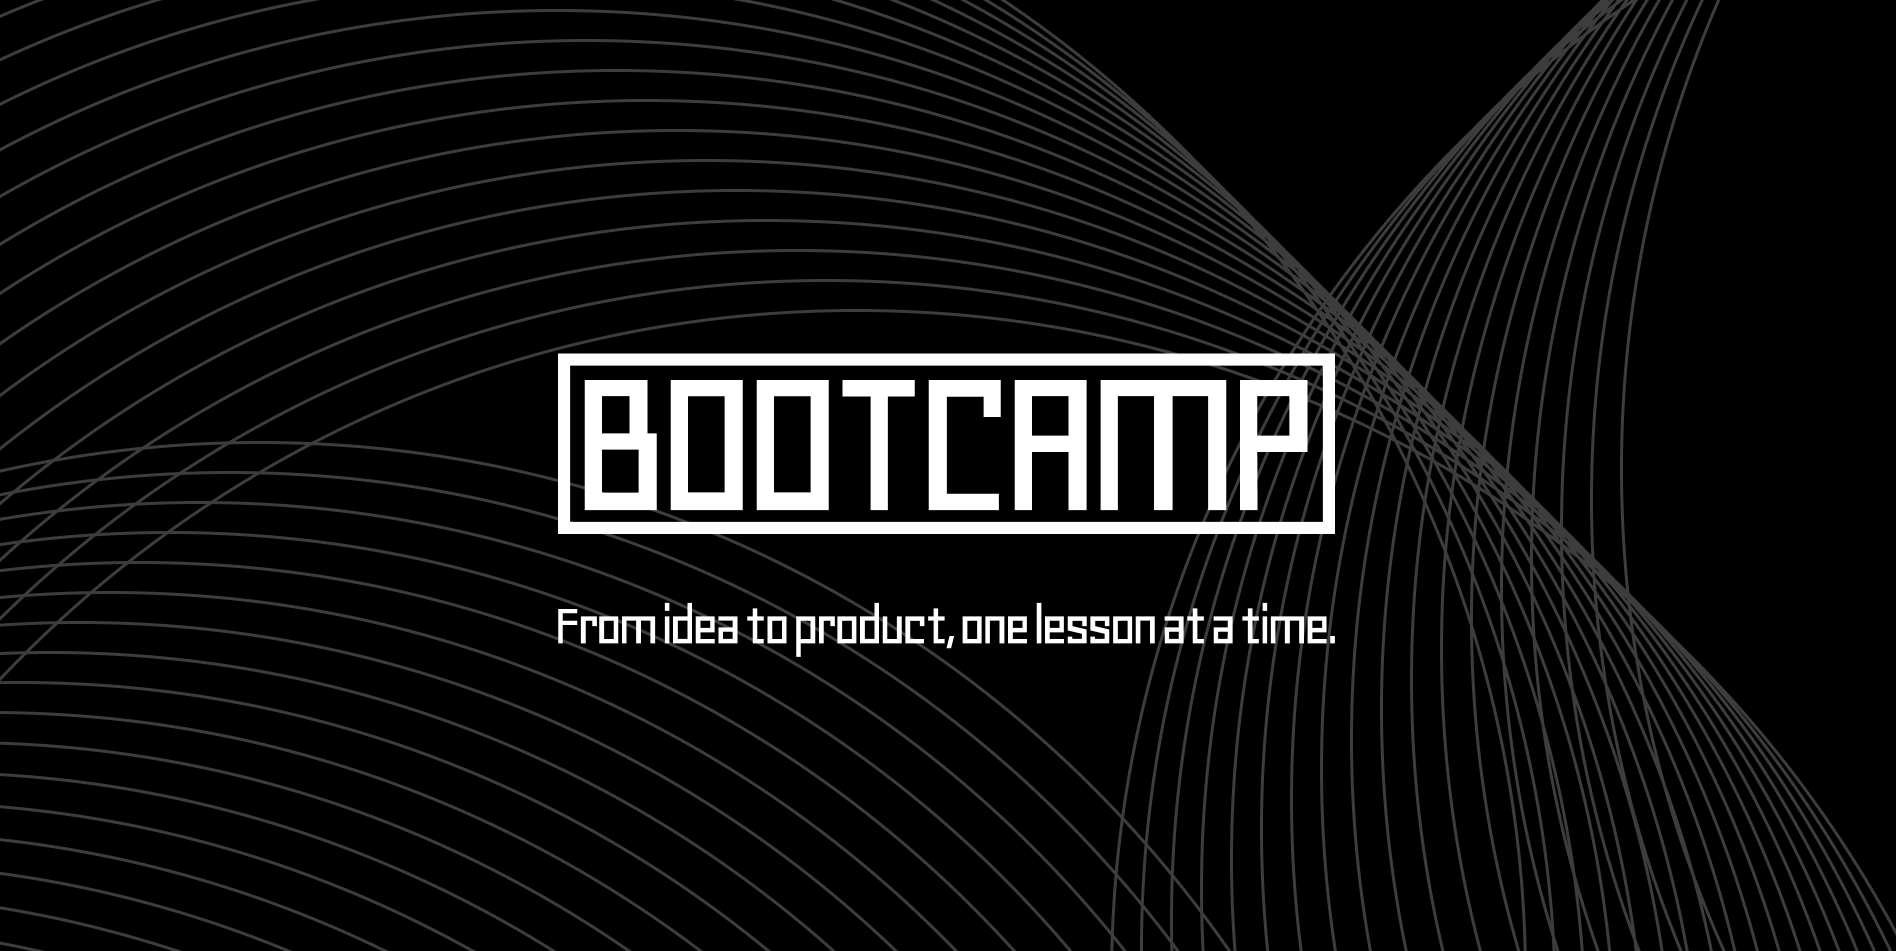 Bootcamp: from idea to product, one lesson at a time